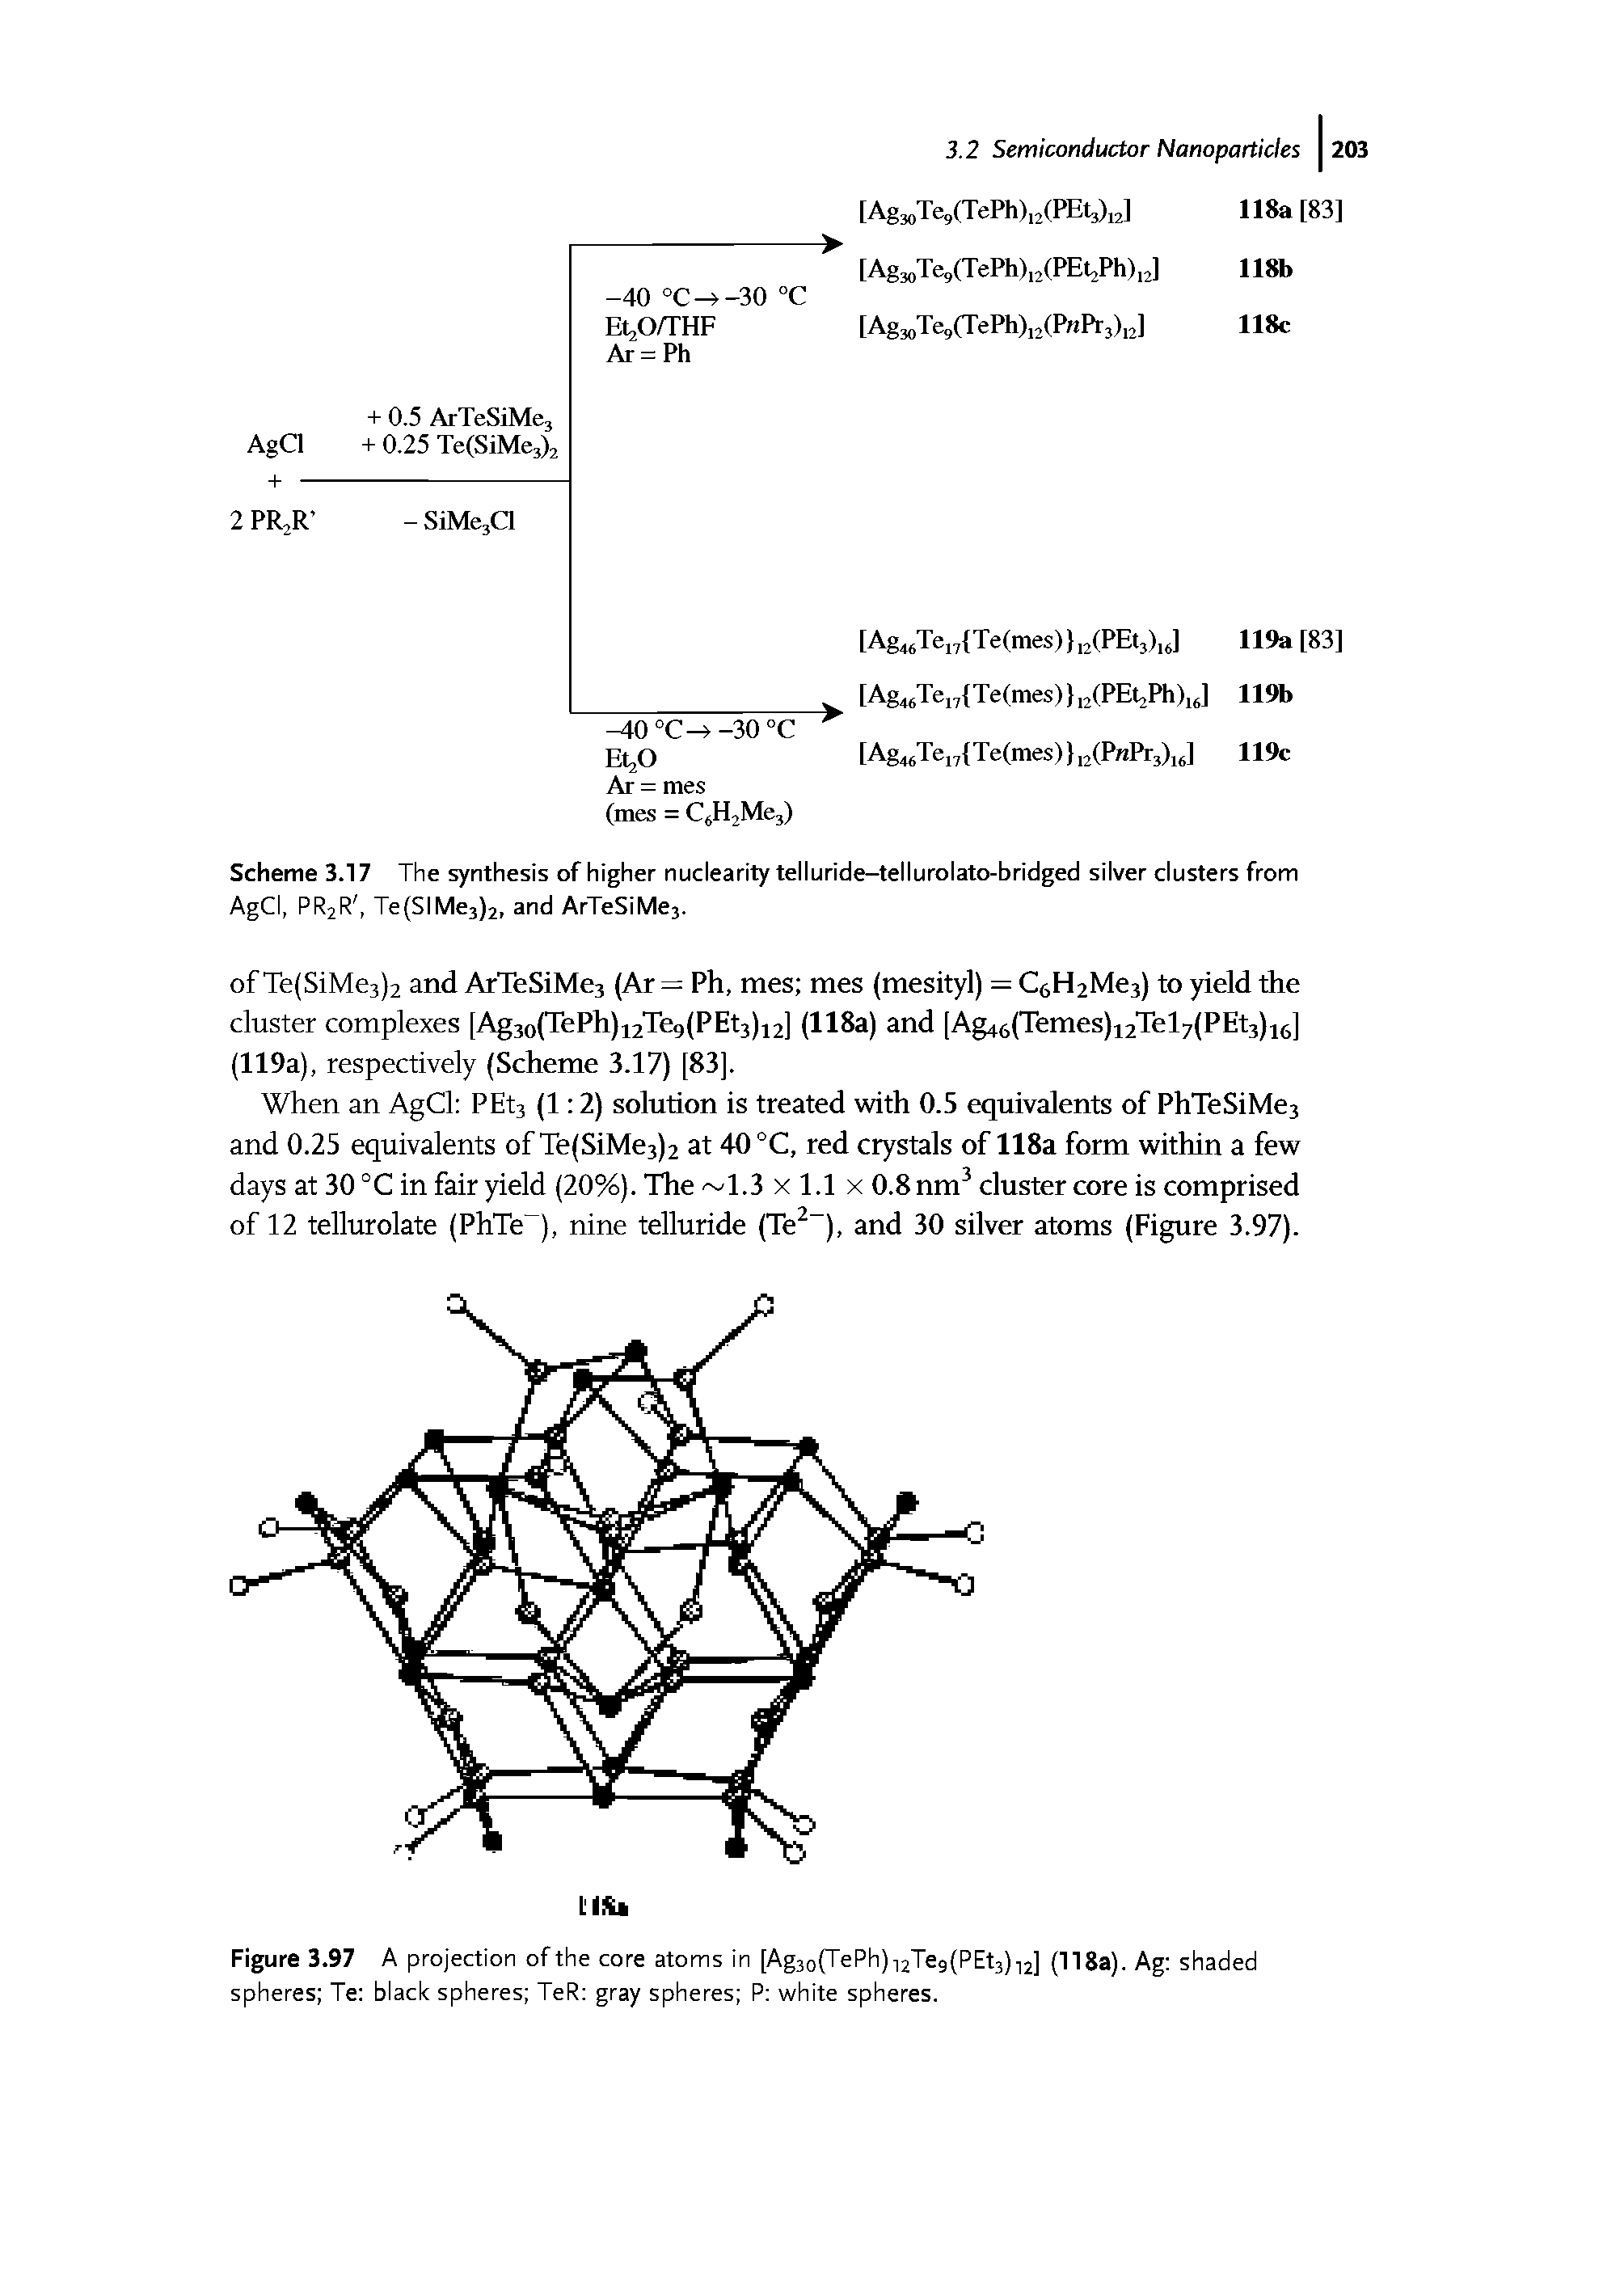 Scheme 3.17 The synthesis of higher nuclearity telluride-tellurolato-bridged silver clusters from AgCI, PRjR, Te(SIMe3)2, and ArTeSiMej.